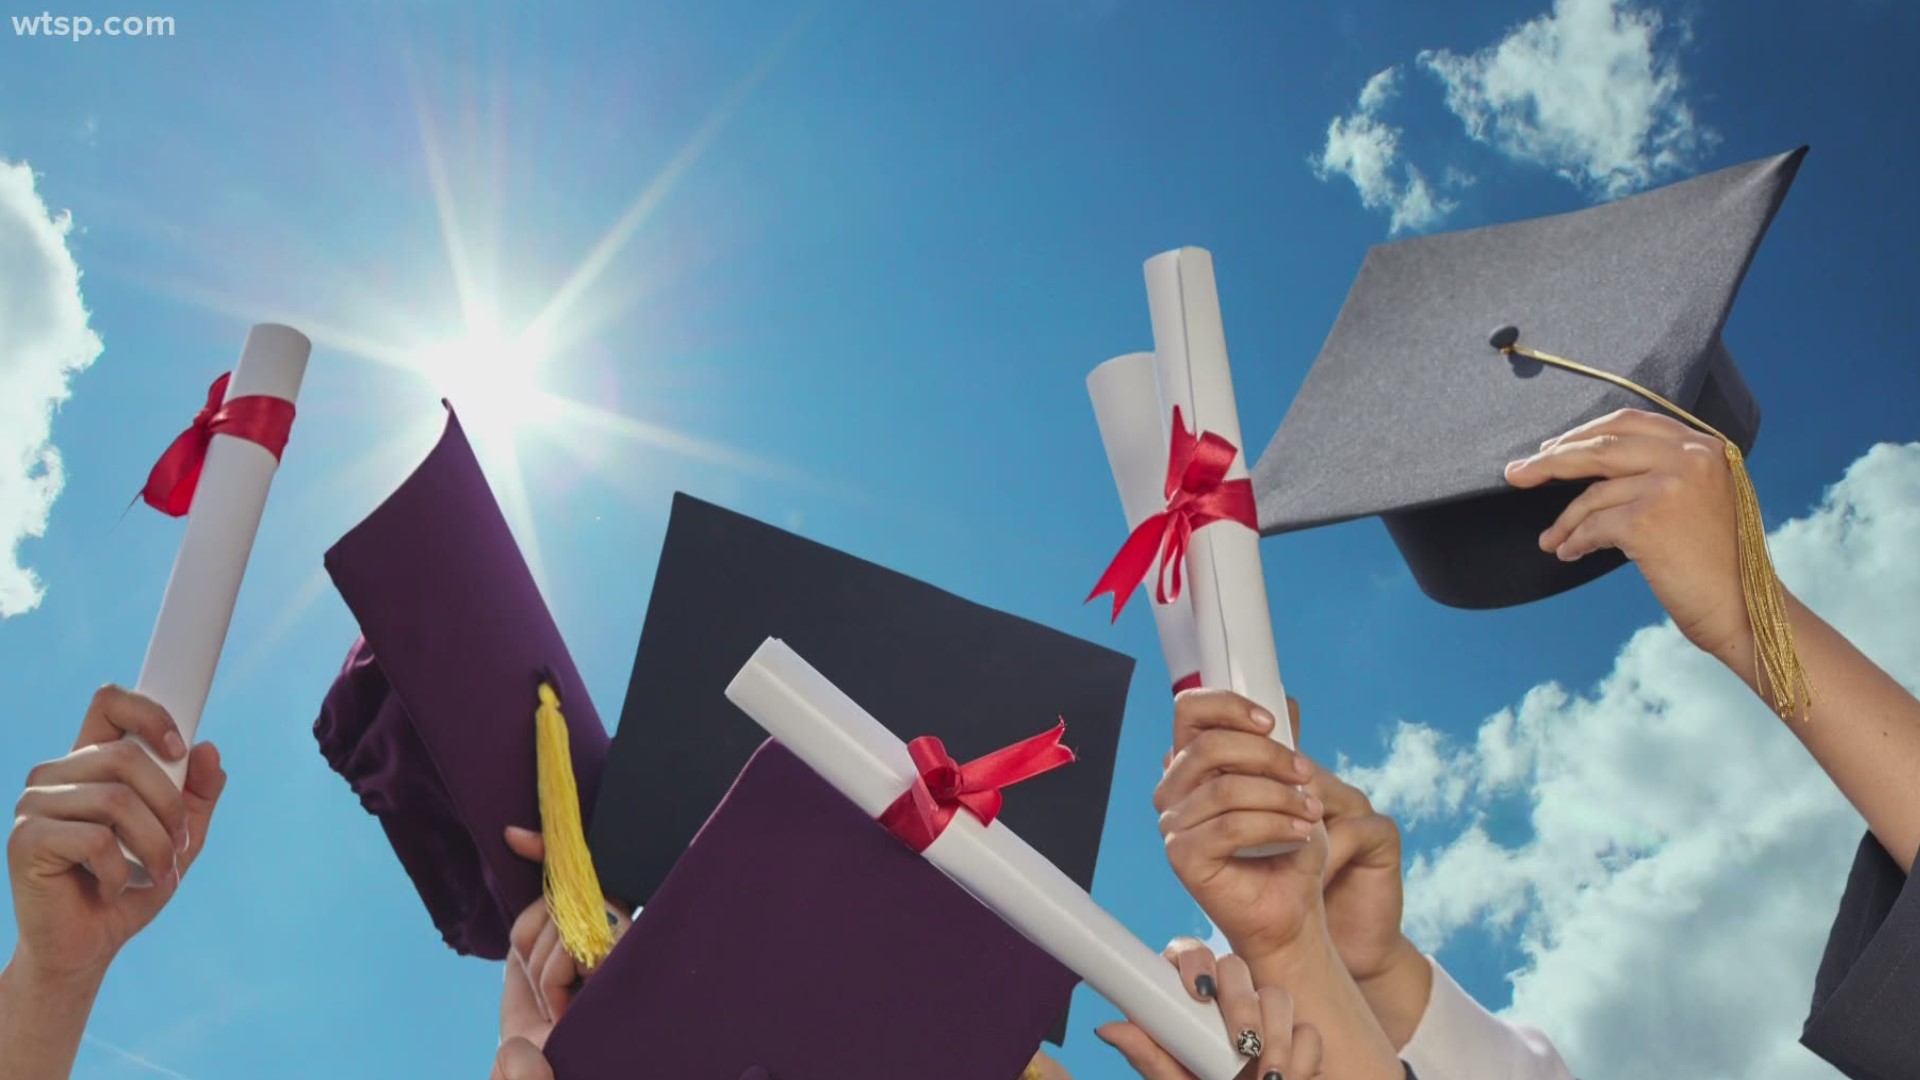 In Florida, 20 petitions have been started by local students and parents calling on their schools to host in-person graduations later in the year.